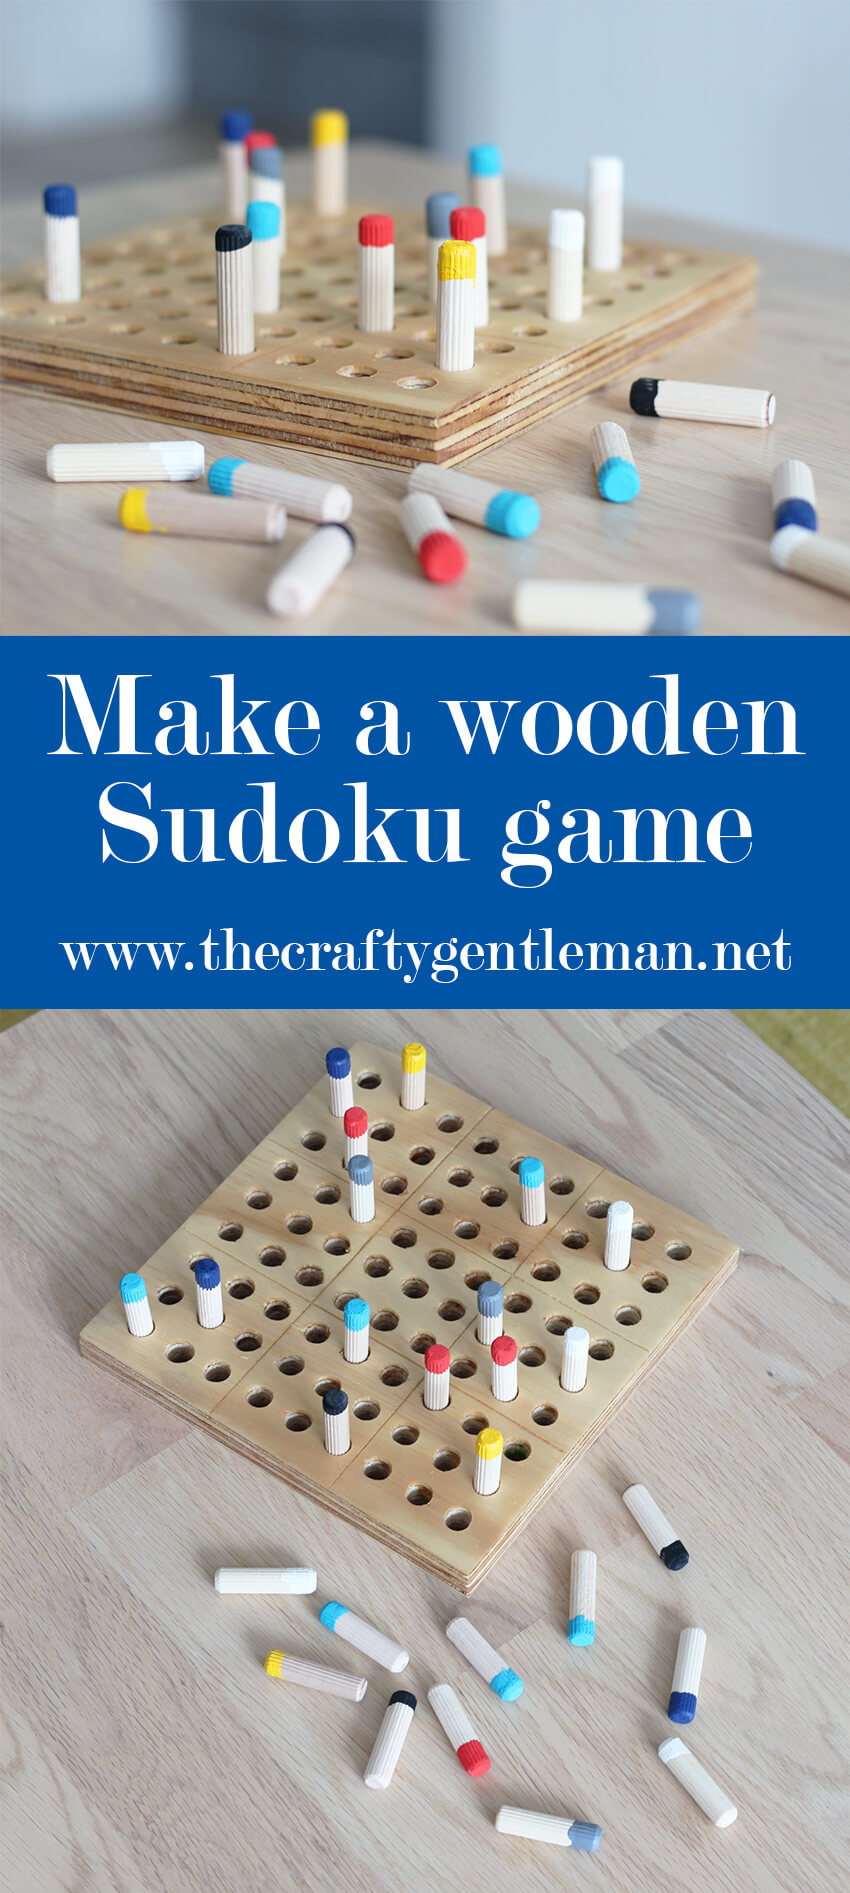 How to make a DIY wooden Sudoku game - Handmade games - Gift ideas for men - Easy woodwork projects for beginners